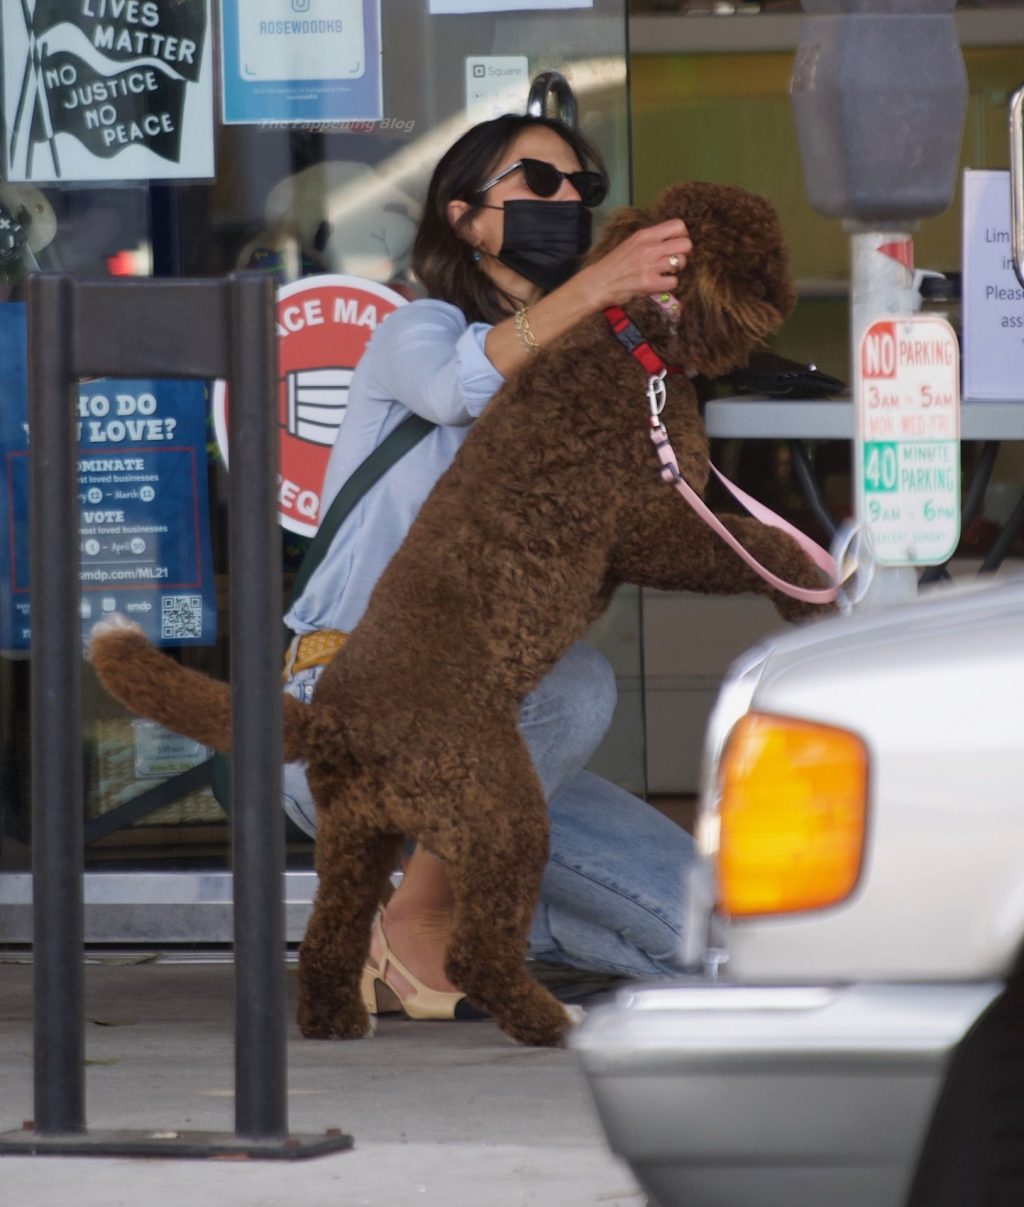 Jordana Brewster Picks Up Her Cute Dog From The Groomer in LA (30 Photos)